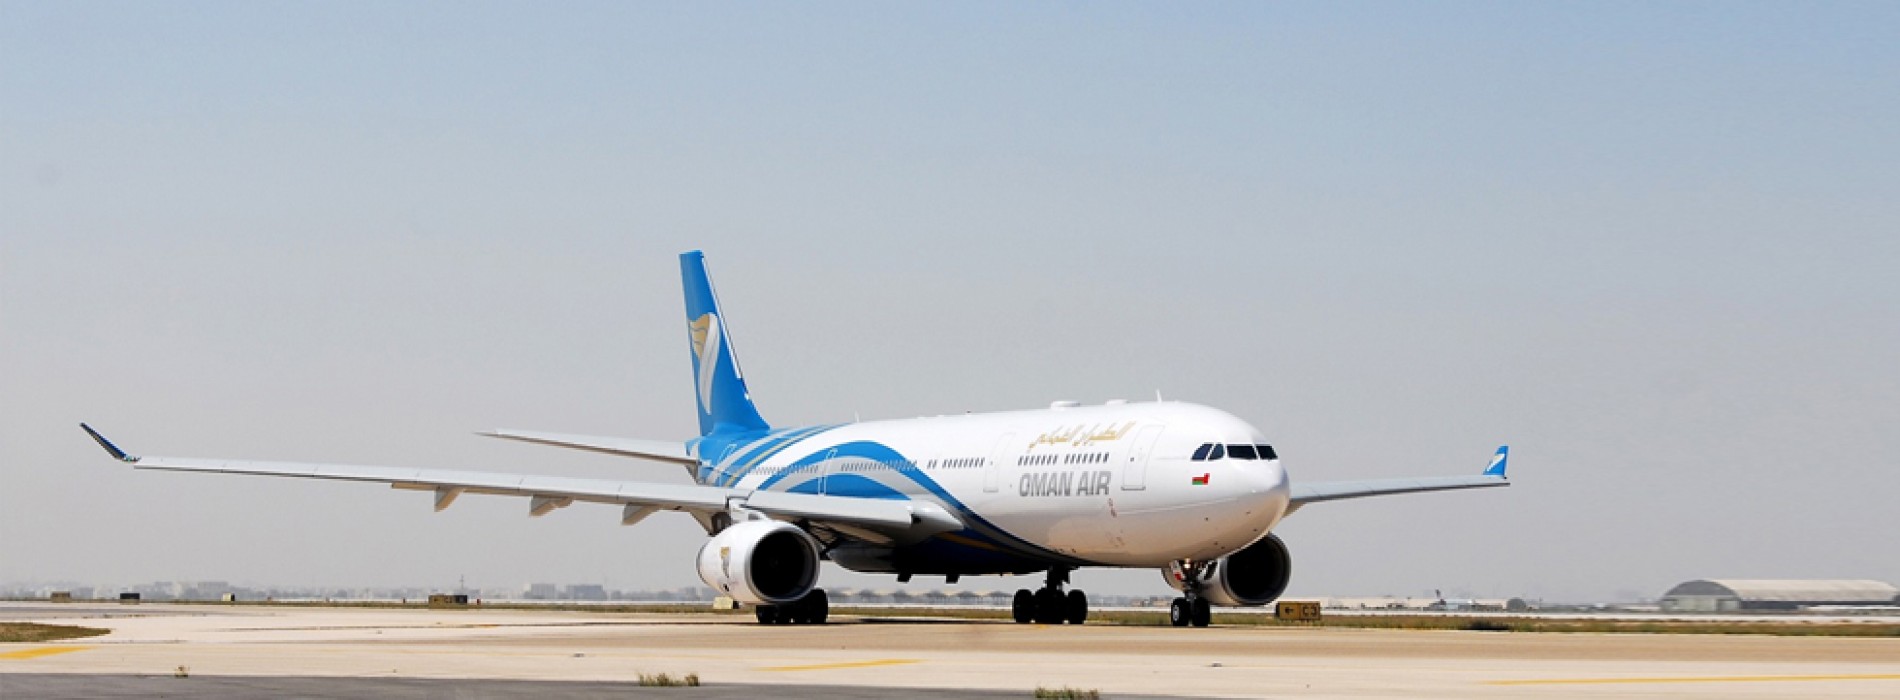 Oman Air takes delivery of first 737 MAX from Boeing